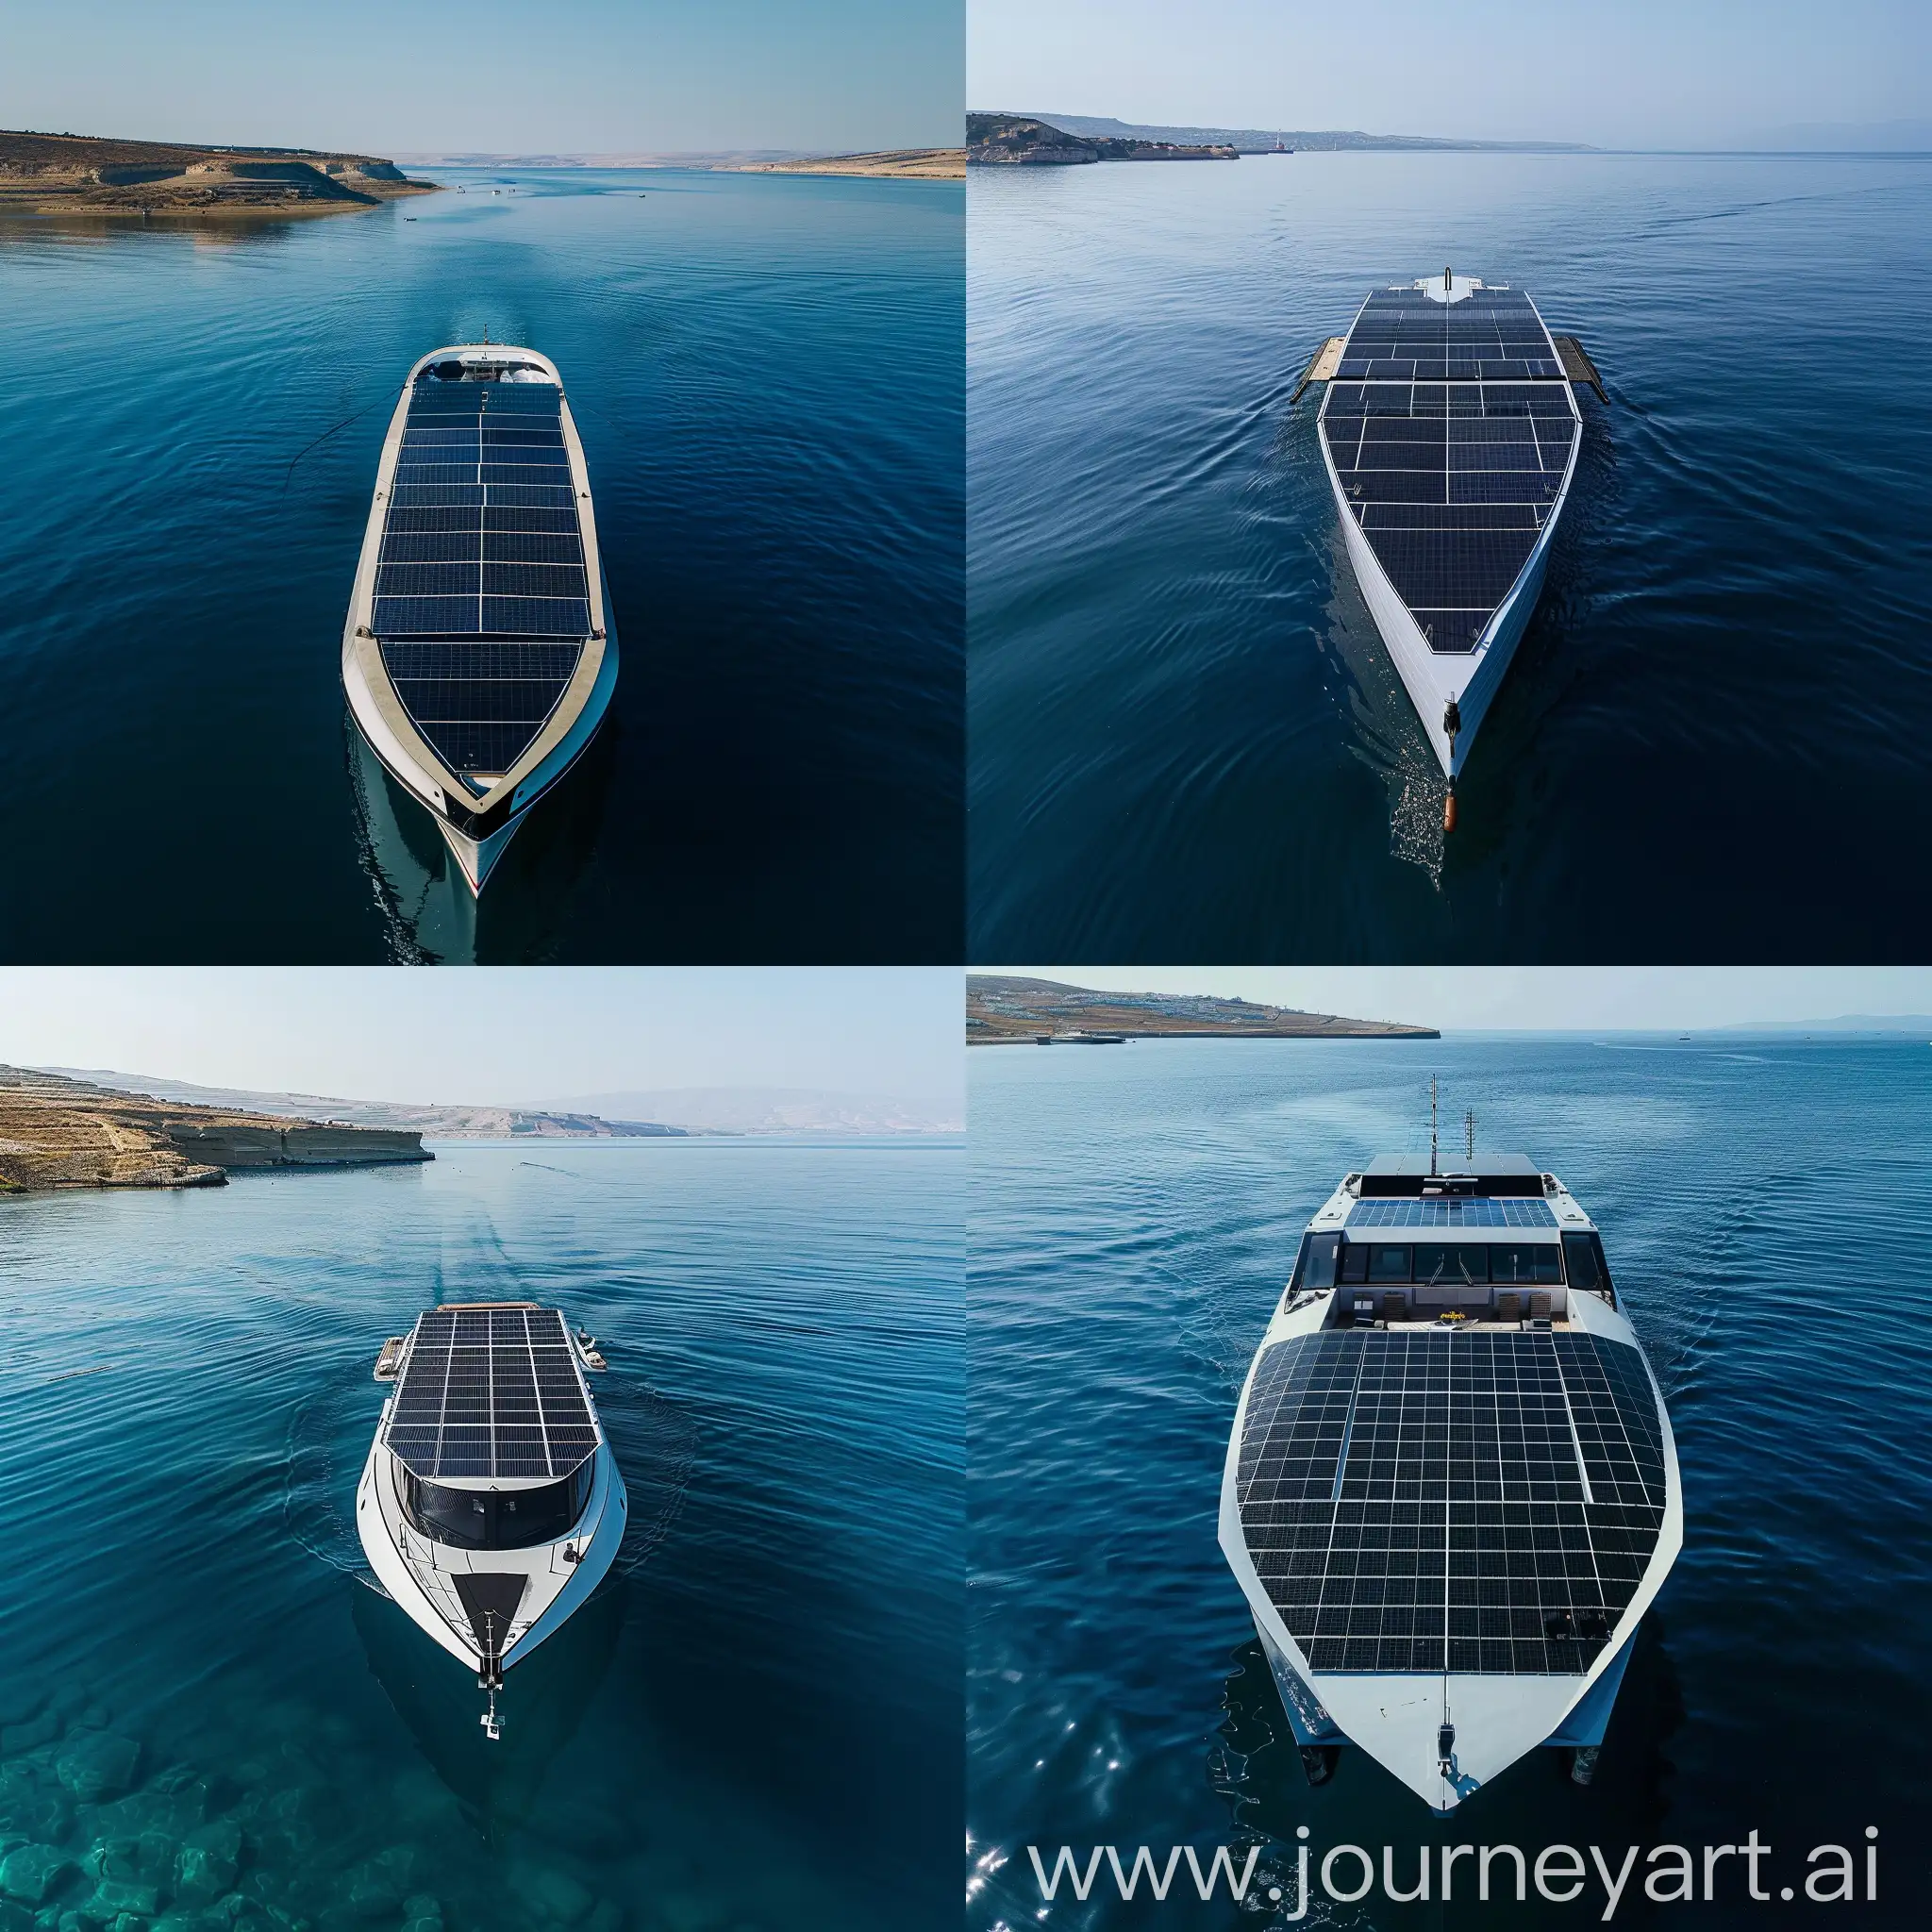 Solitary-SolarPowered-Vessel-on-Tranquil-Blue-Waters